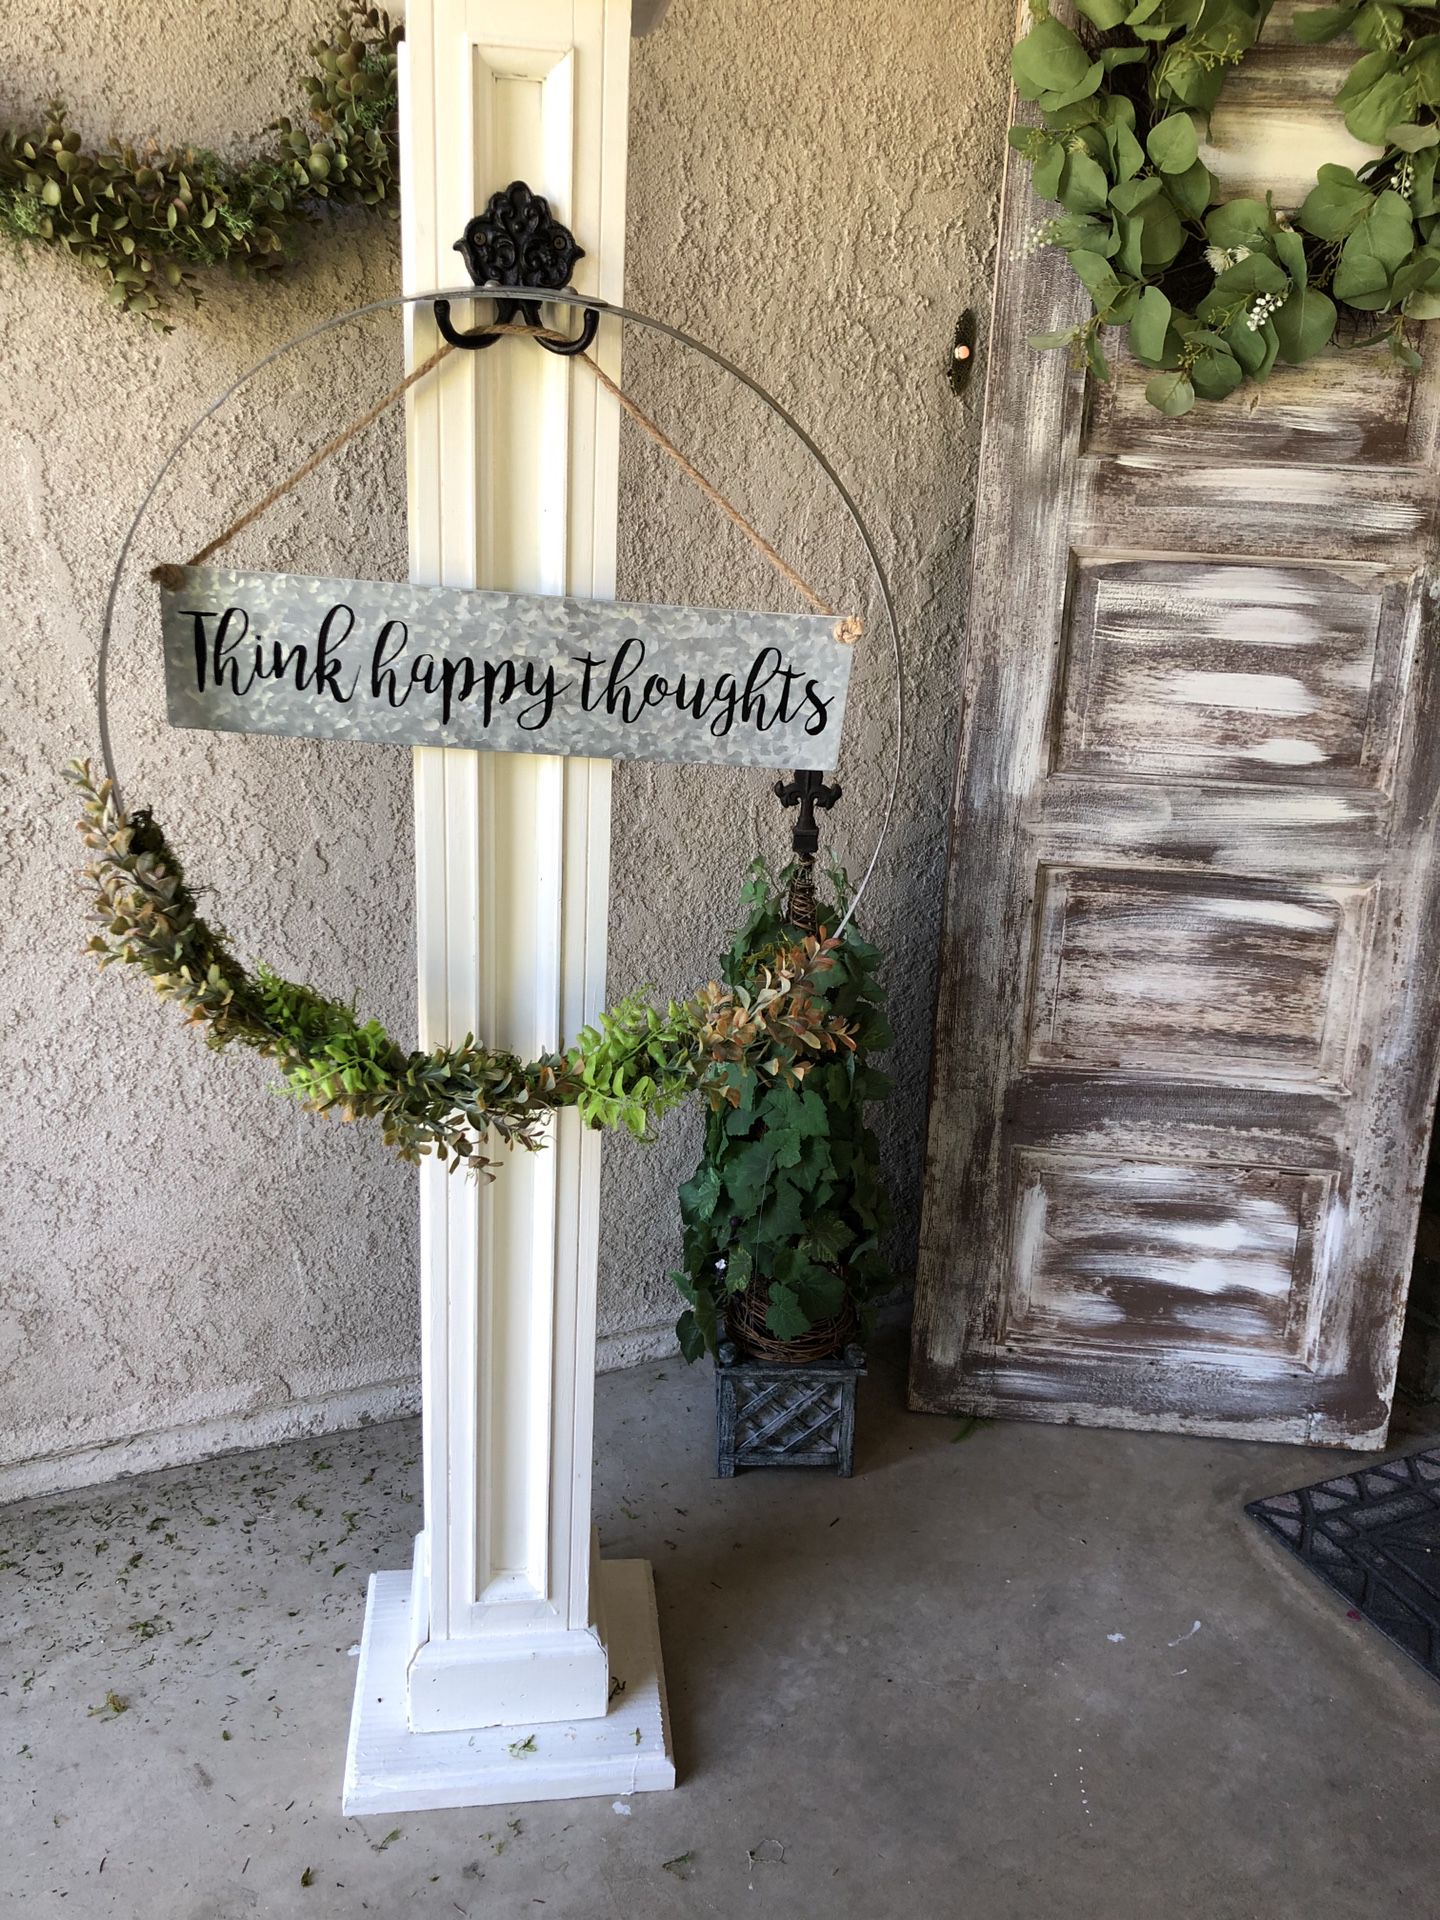 Sign post with win barrel wreath